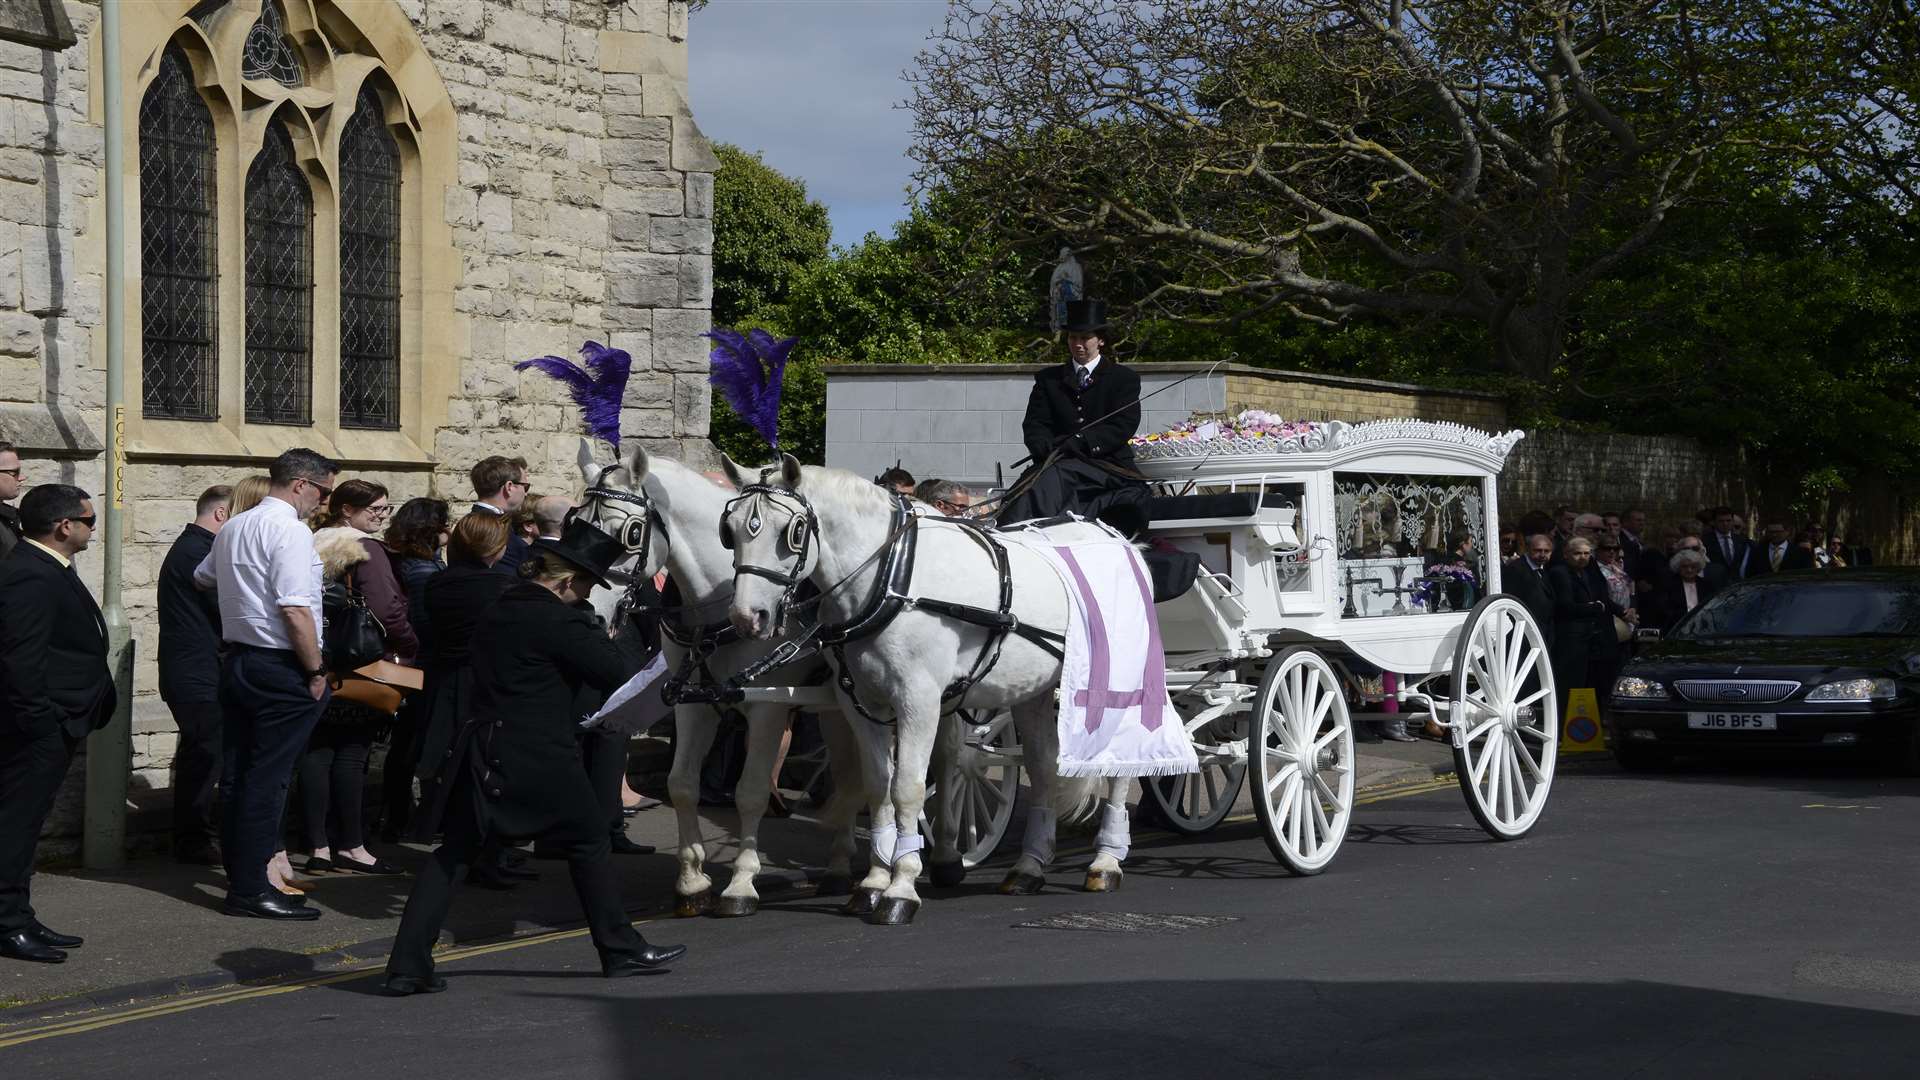 Two white horses pulled the hearse